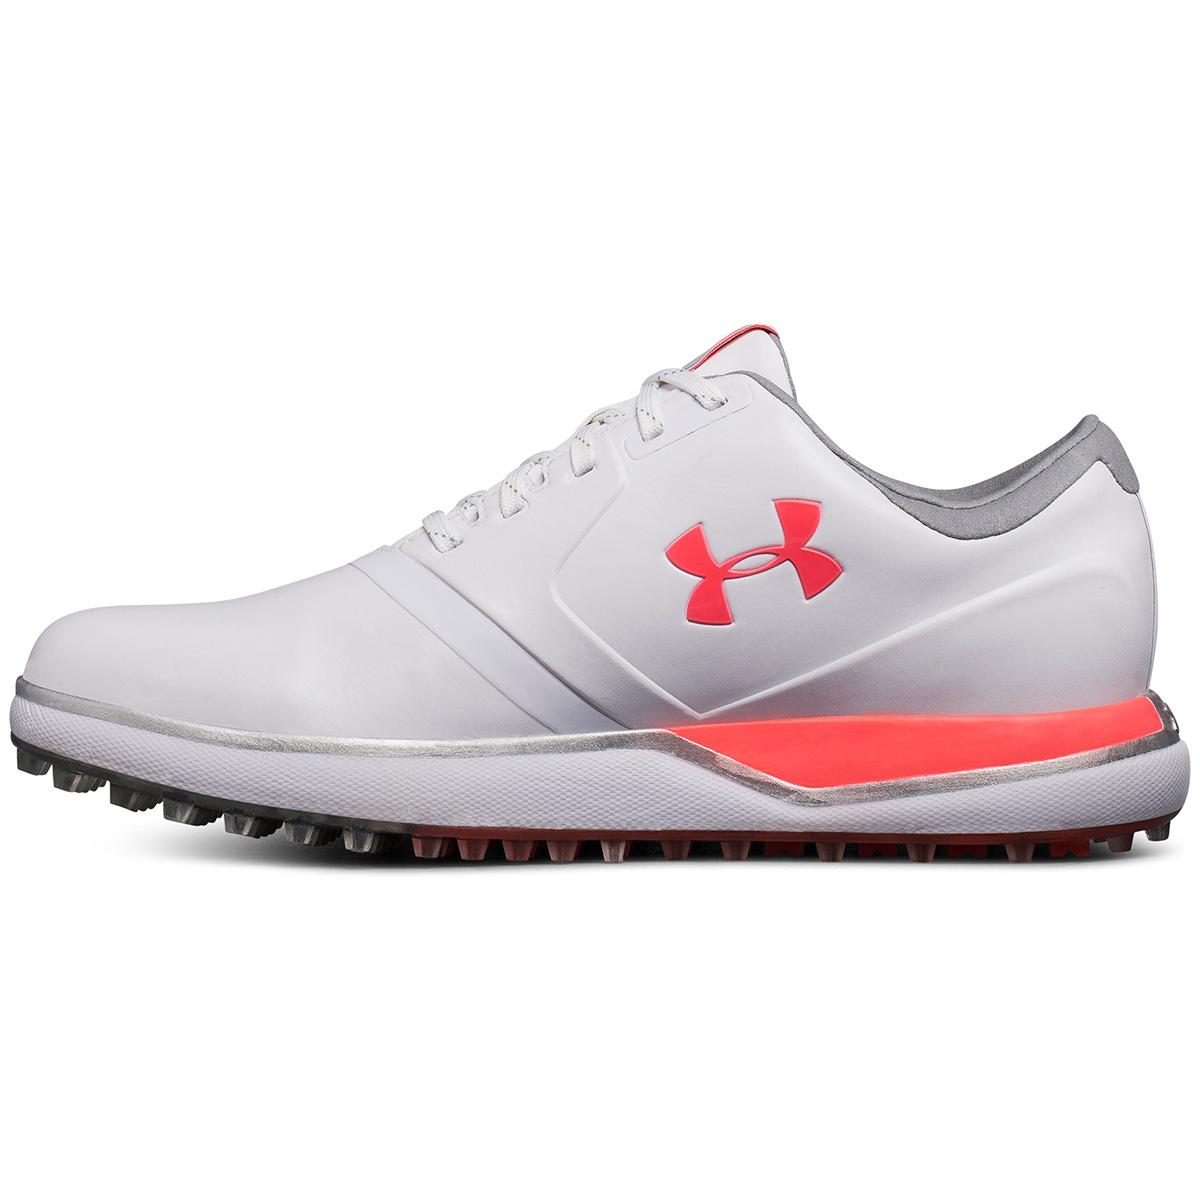 Under Armour Performance Ladies Shoes from american golf